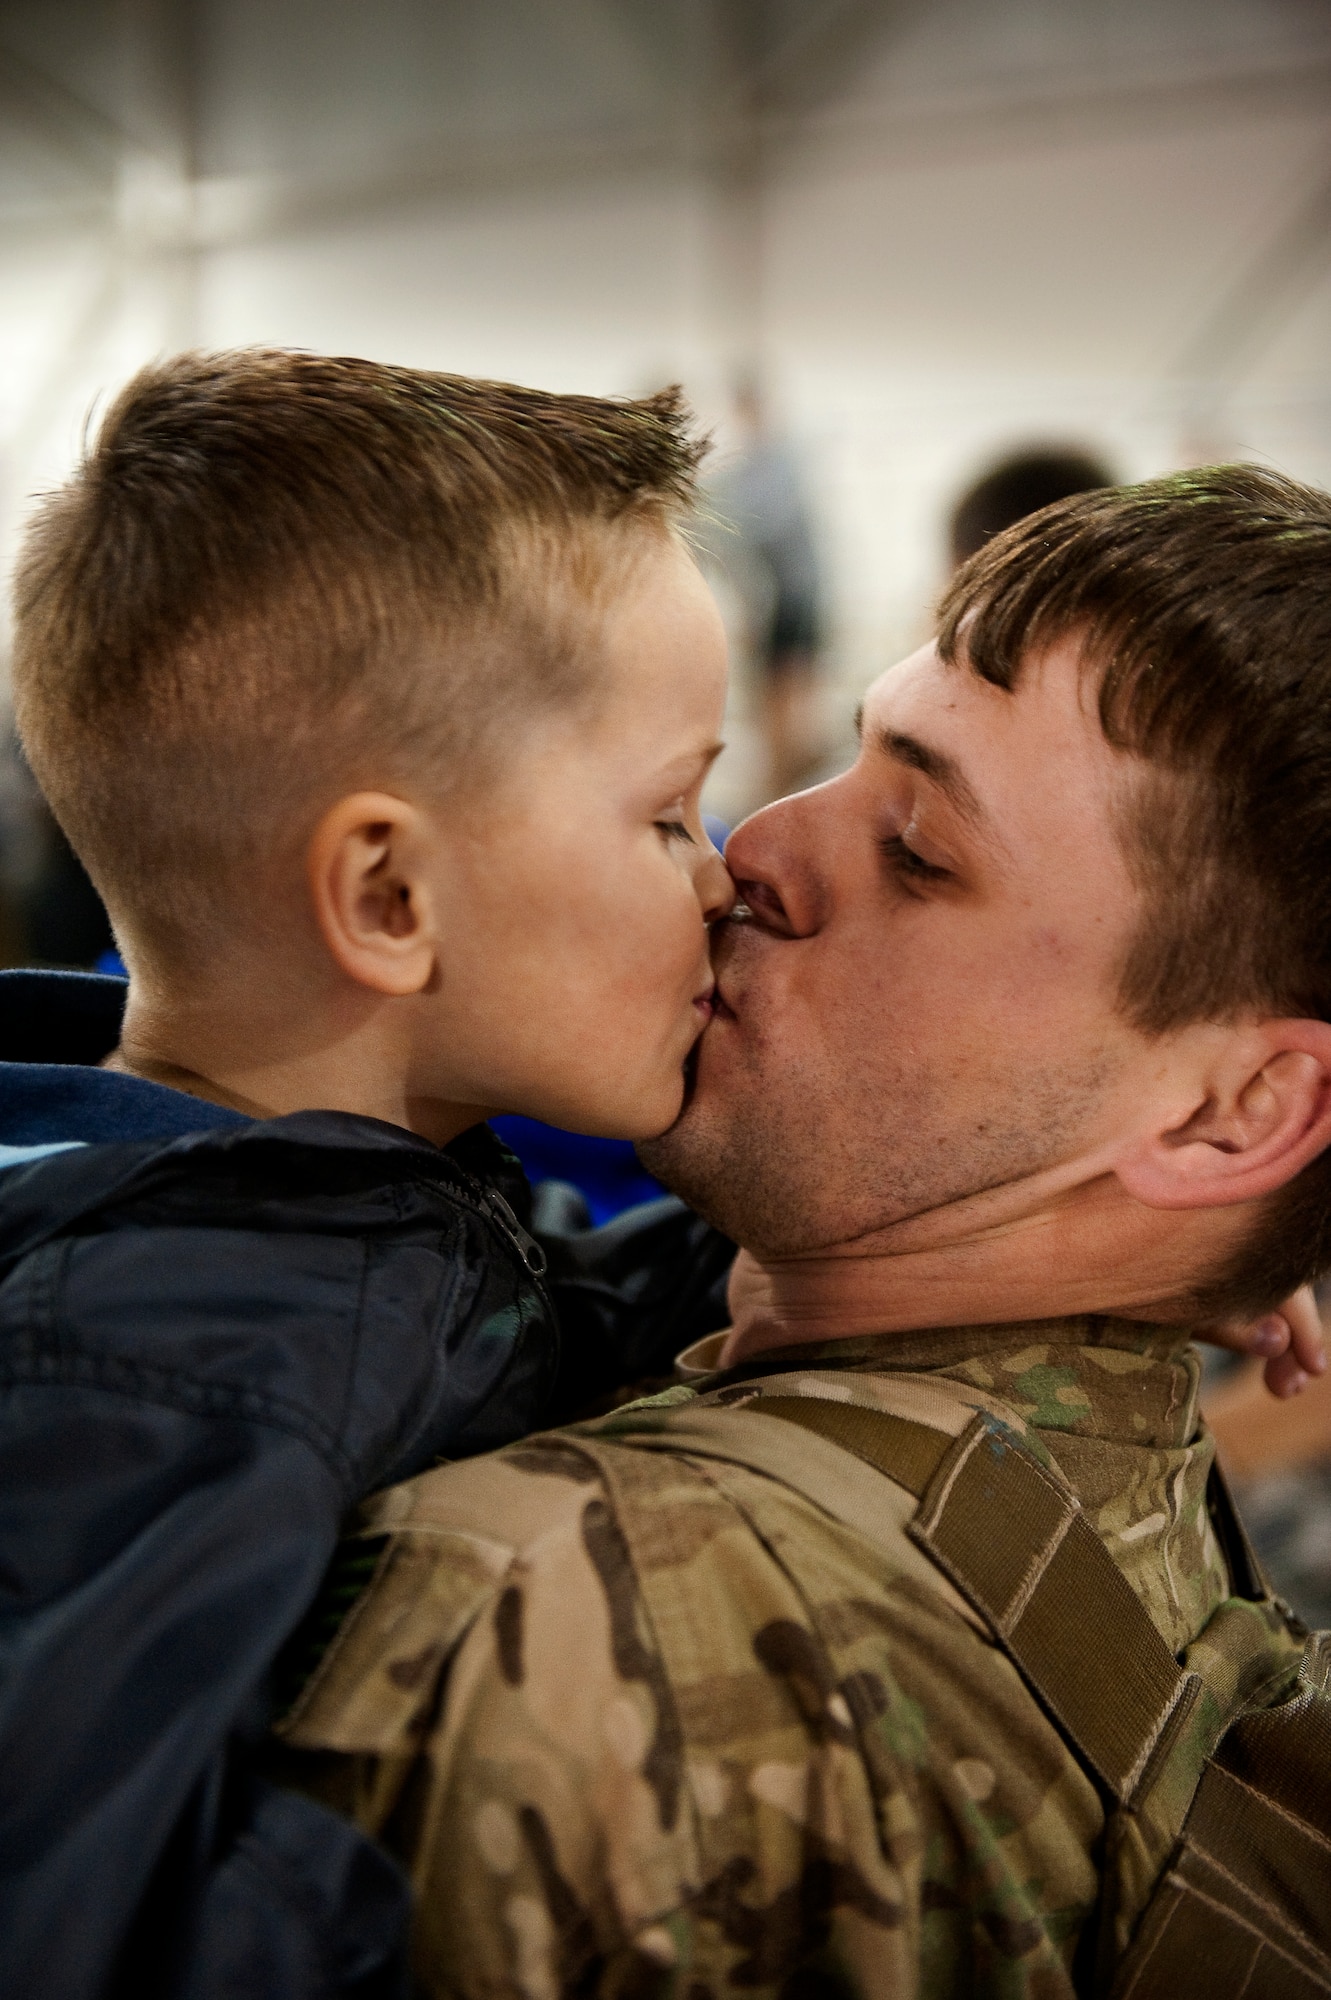 U.S. Air Force Staff Sgt. Casey Strauss, a special operations forces fly away security team from 1st Special Operations Security Forces Squadron, kisses his son Carter at the 16th Aircraft Maintenance Unit hangar on Hurlburt Field, Fla., April 6, 2012. Strauss was met by family members after serving a deployment in support of overseas contingency operations. (U.S. Air Force photo/Airman 1st Class Christopher Williams)